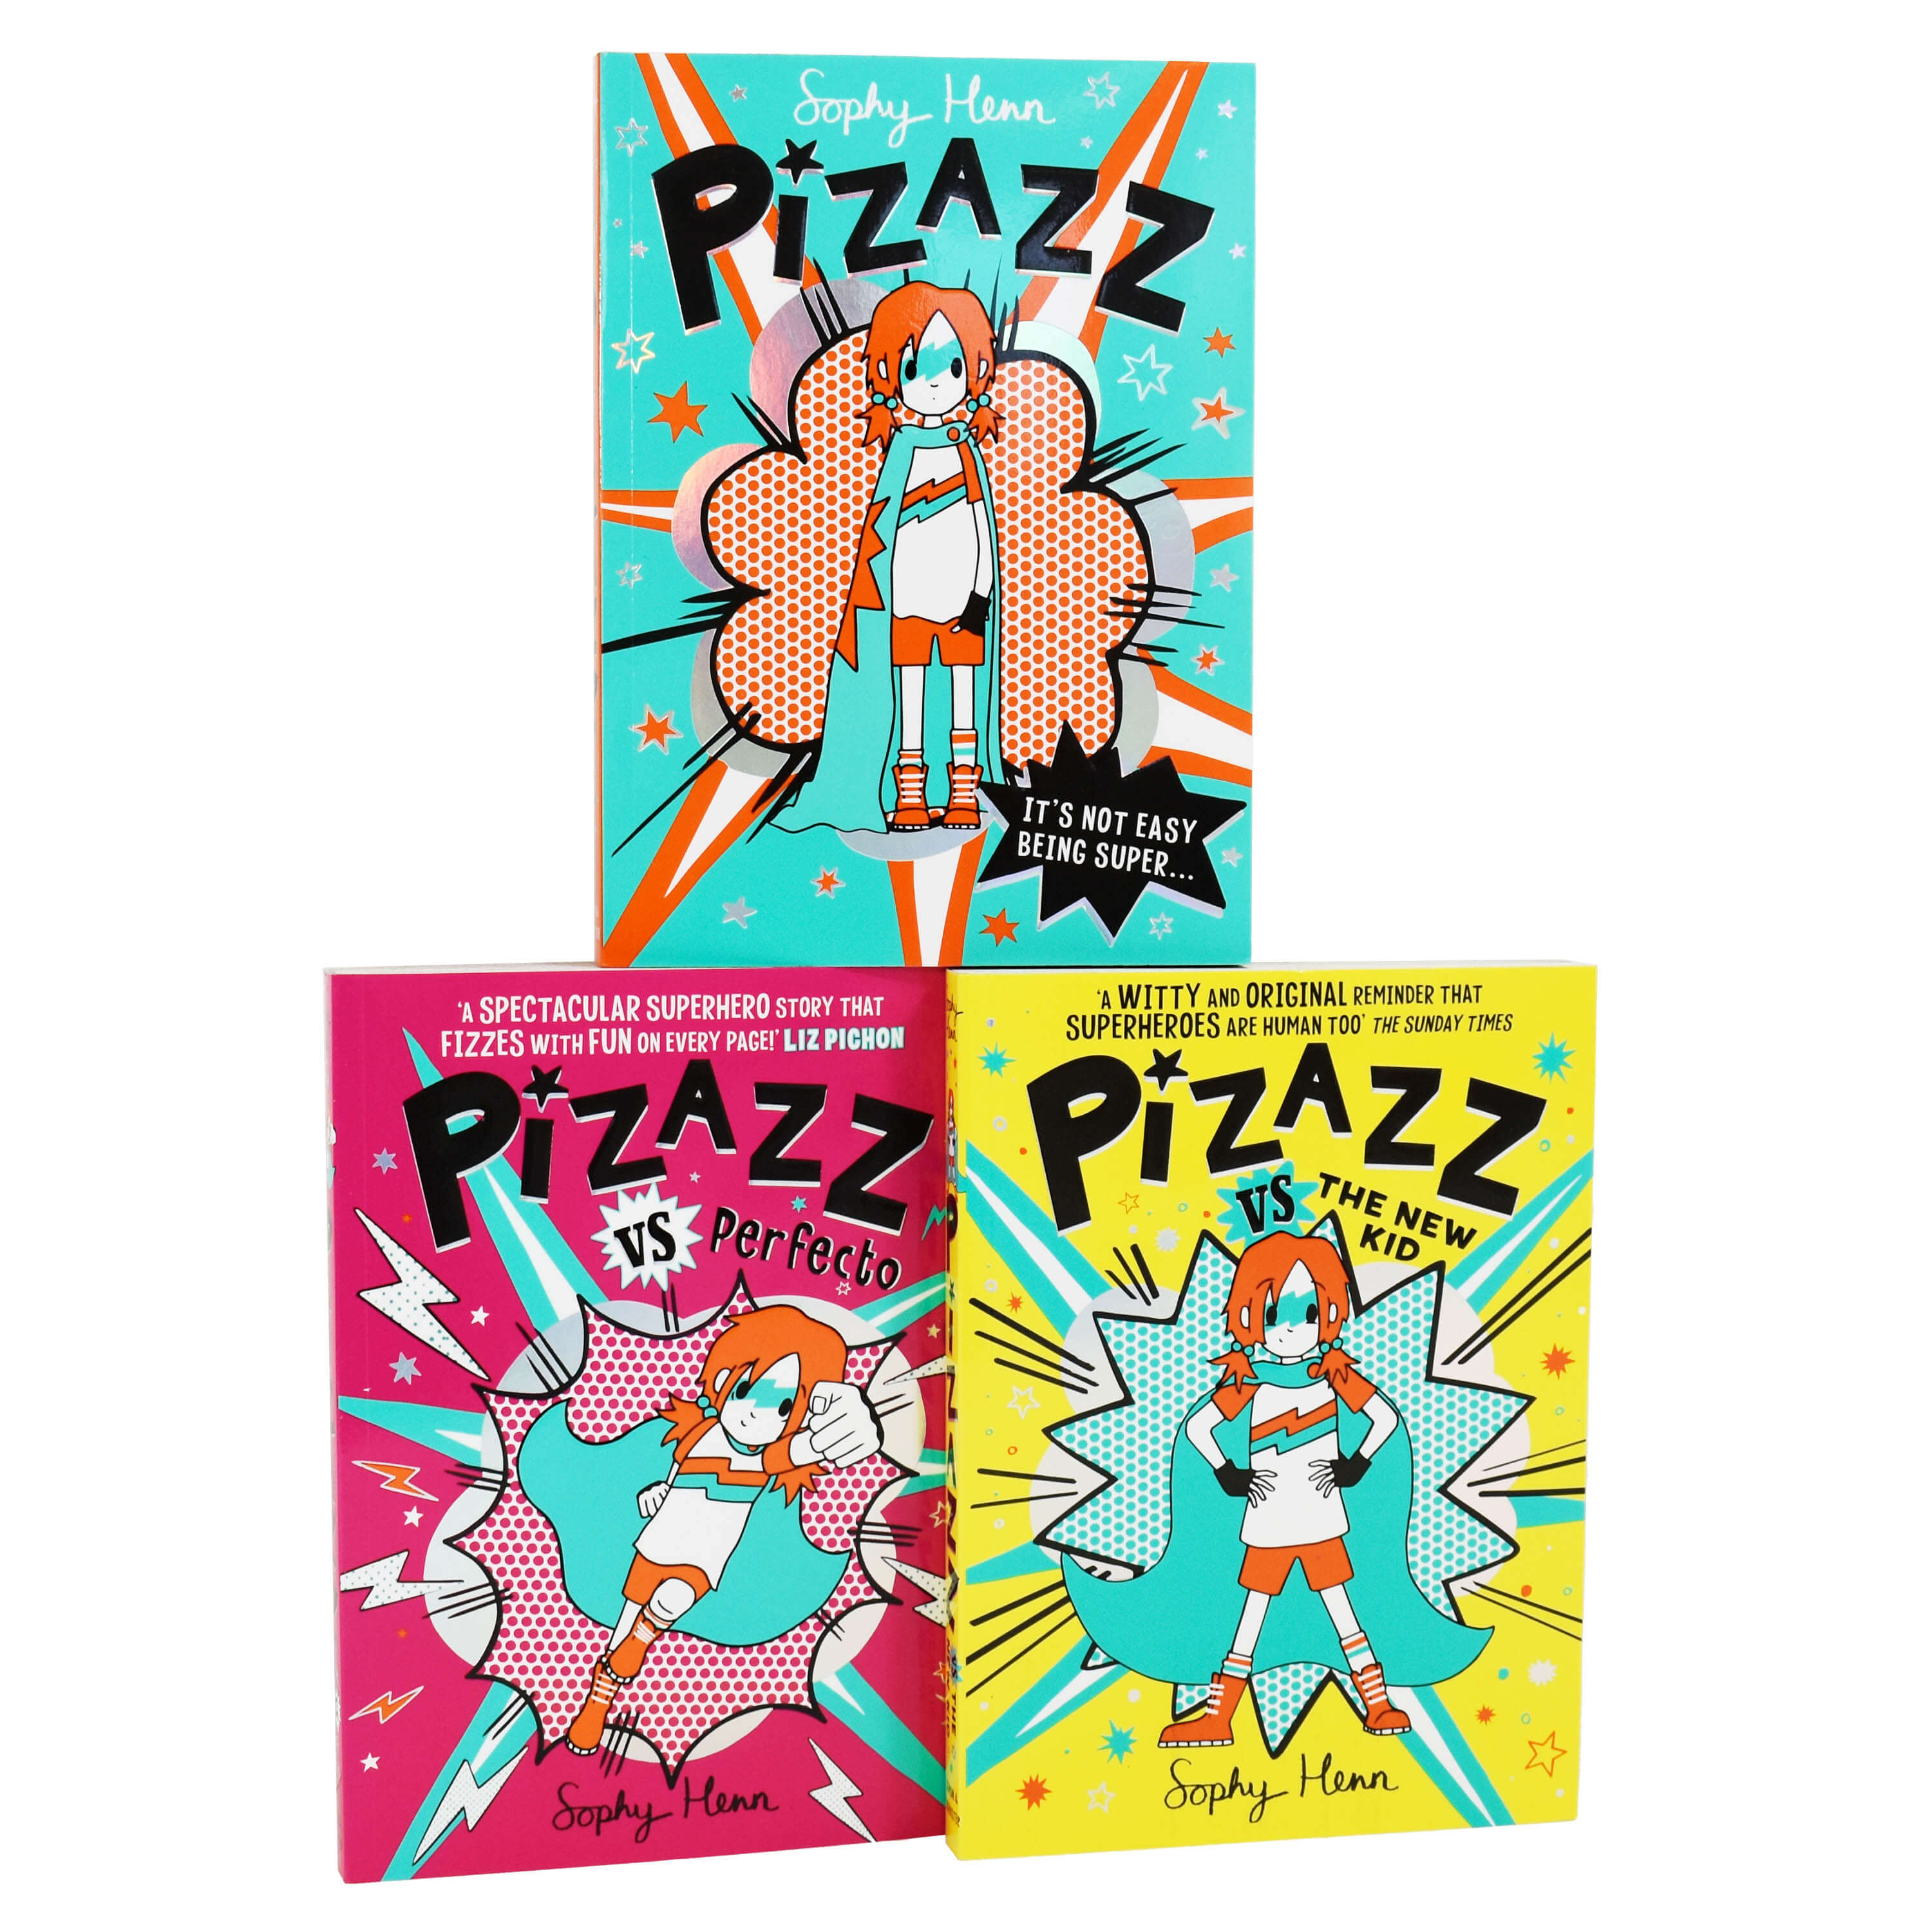 Pizazz 3 Books Set (Perfecto, The New Kid, It's Not Easy Being Super) by Sophy Henn - Ages 7-9 - Paperback